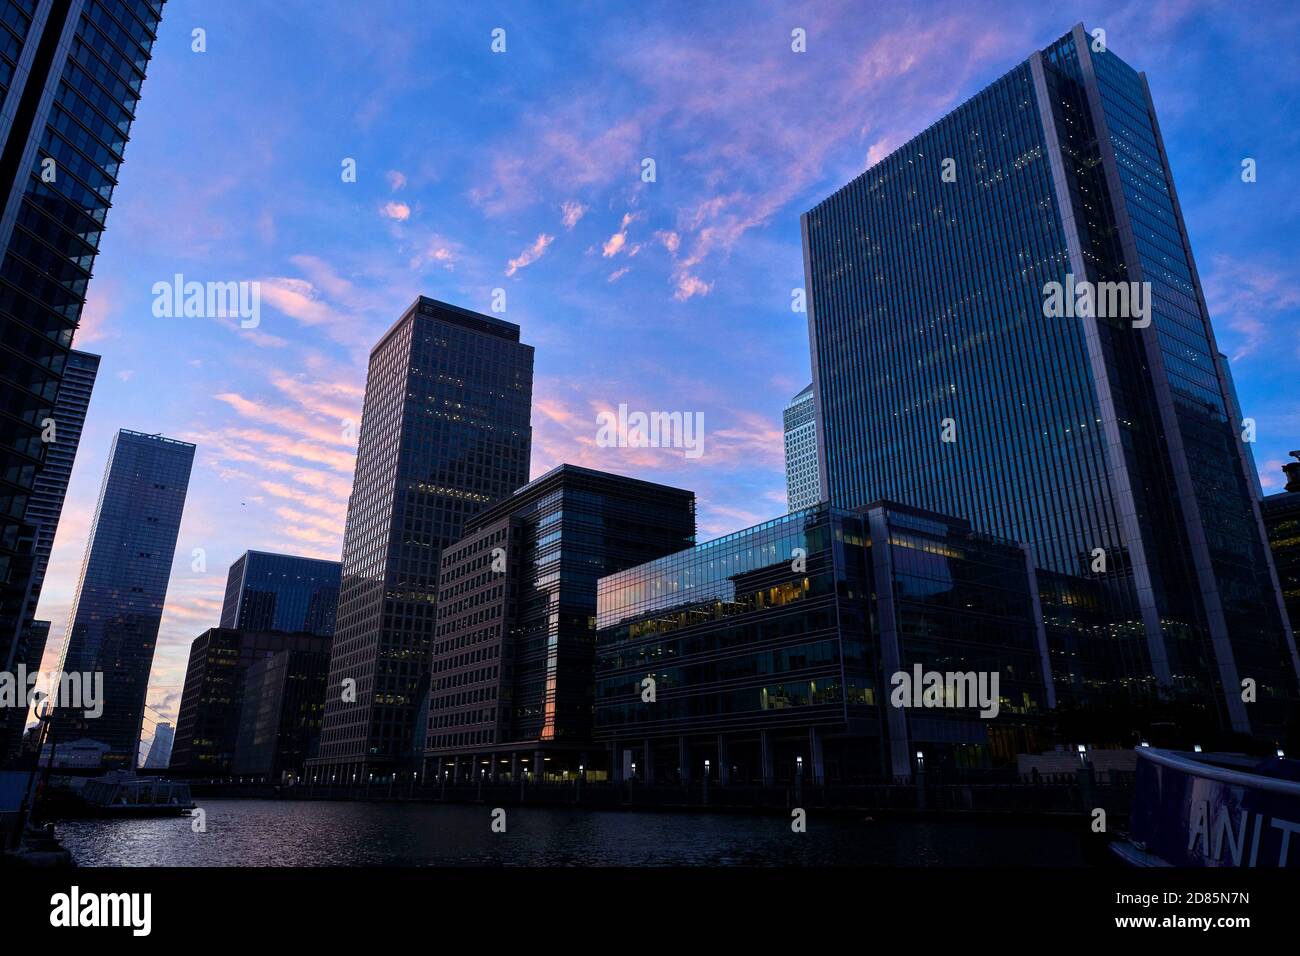 Office buildings and residential towers at dusk, Canary Wharf, Docklands, East end of London, UK Stock Photo